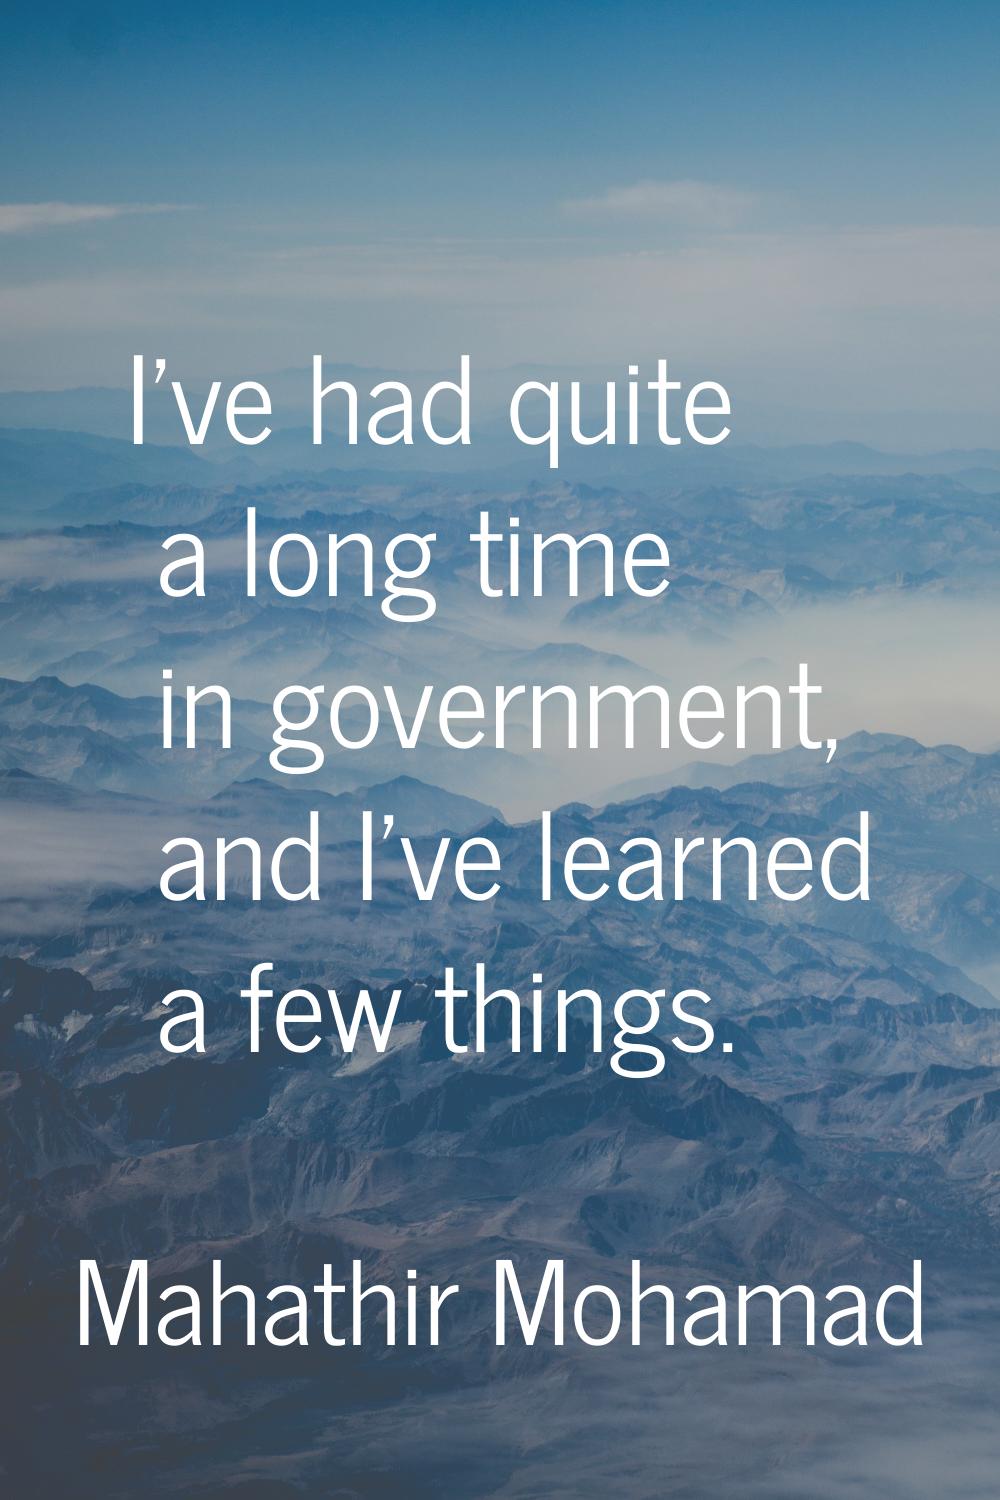 I've had quite a long time in government, and I've learned a few things.